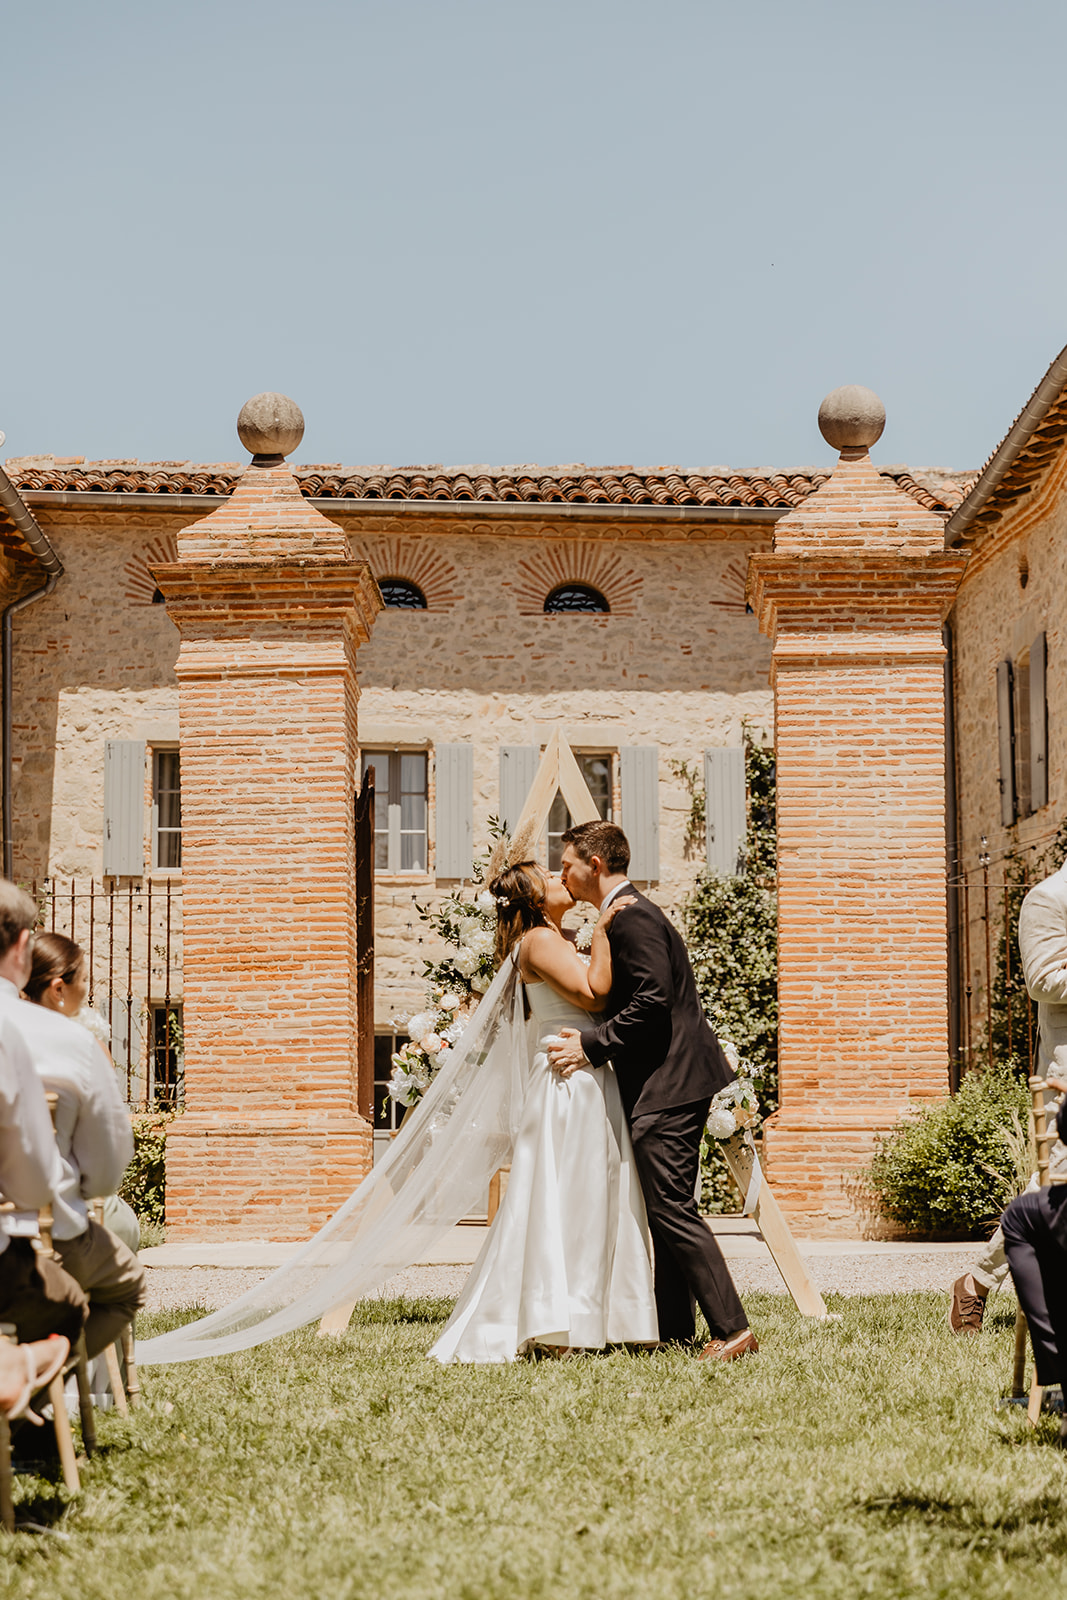 Bride and Groom getting married at a Destination Wedding in France. Photography & Videography by OliveJoy Photography